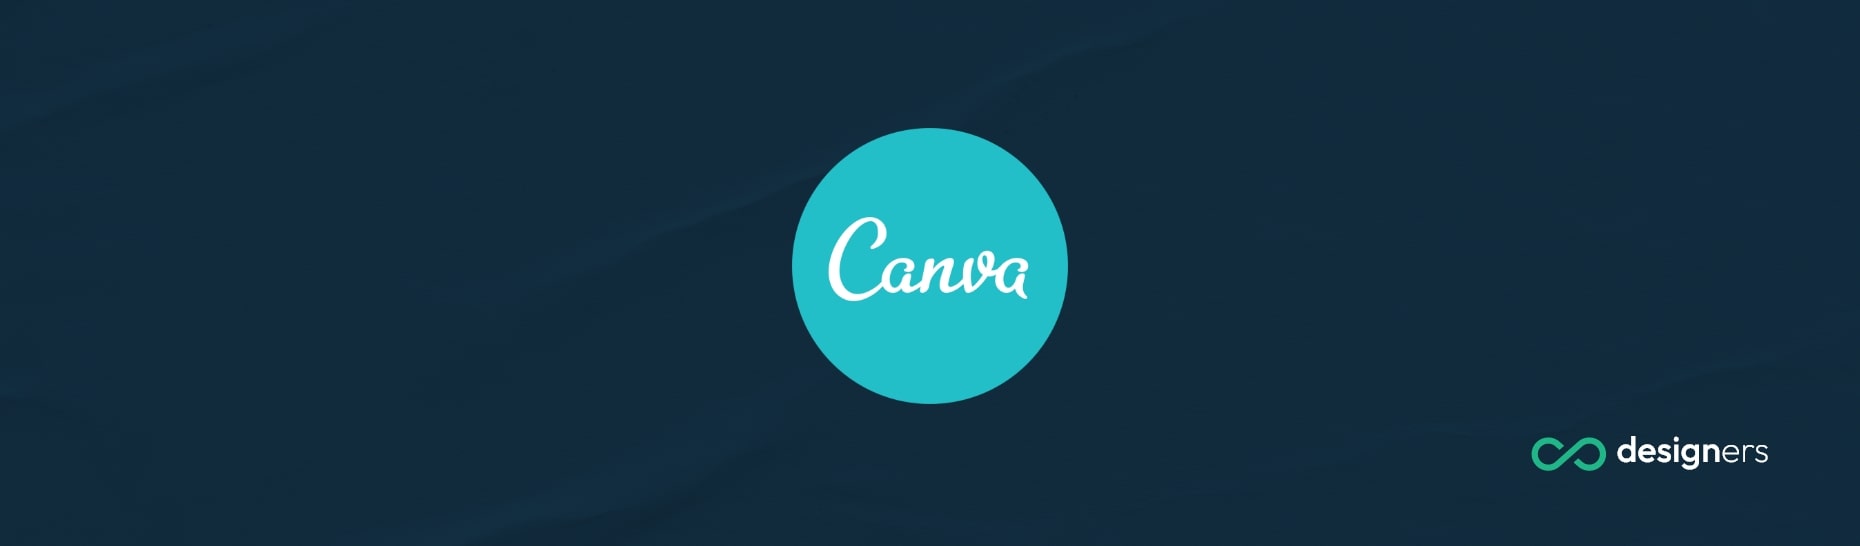 How do I put a Border Around an Image in Canva?